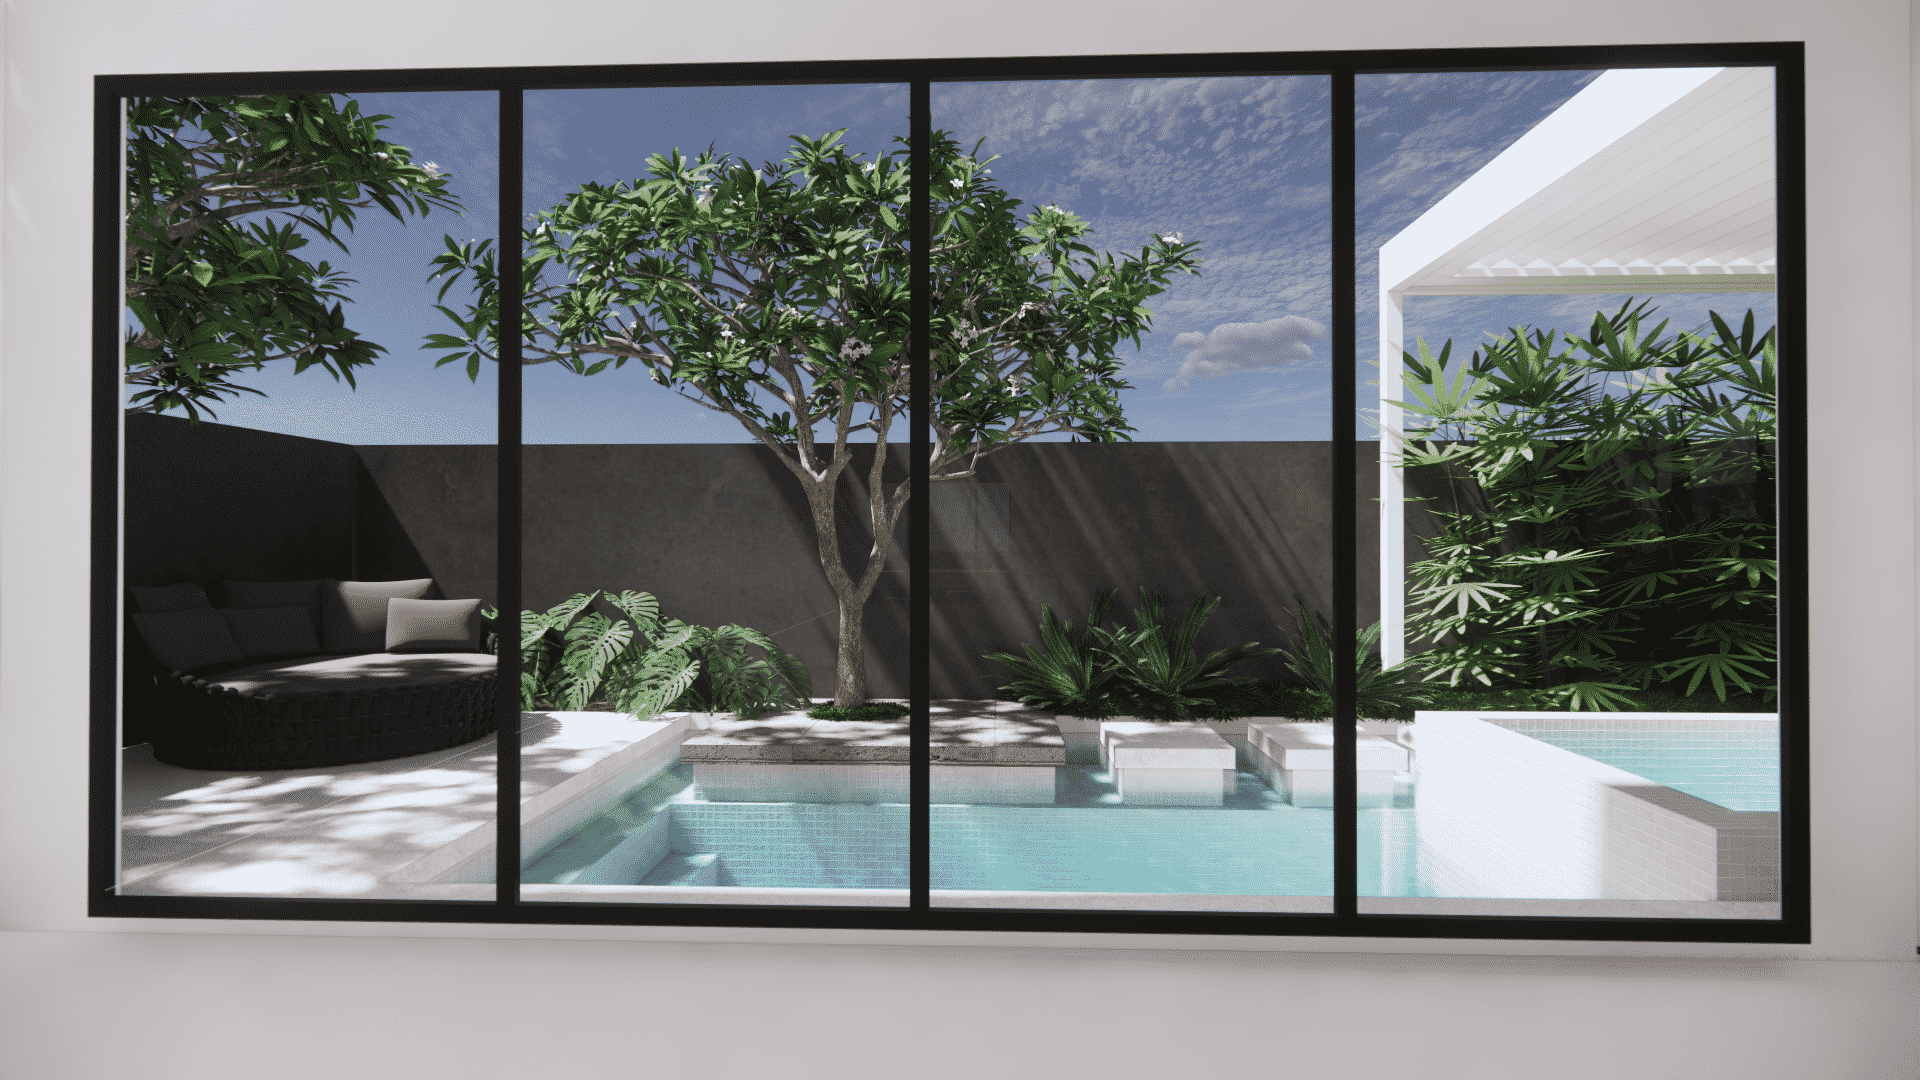 A landscape design render showing a contemporary concrete pool with stepping elements, seen through a large window.